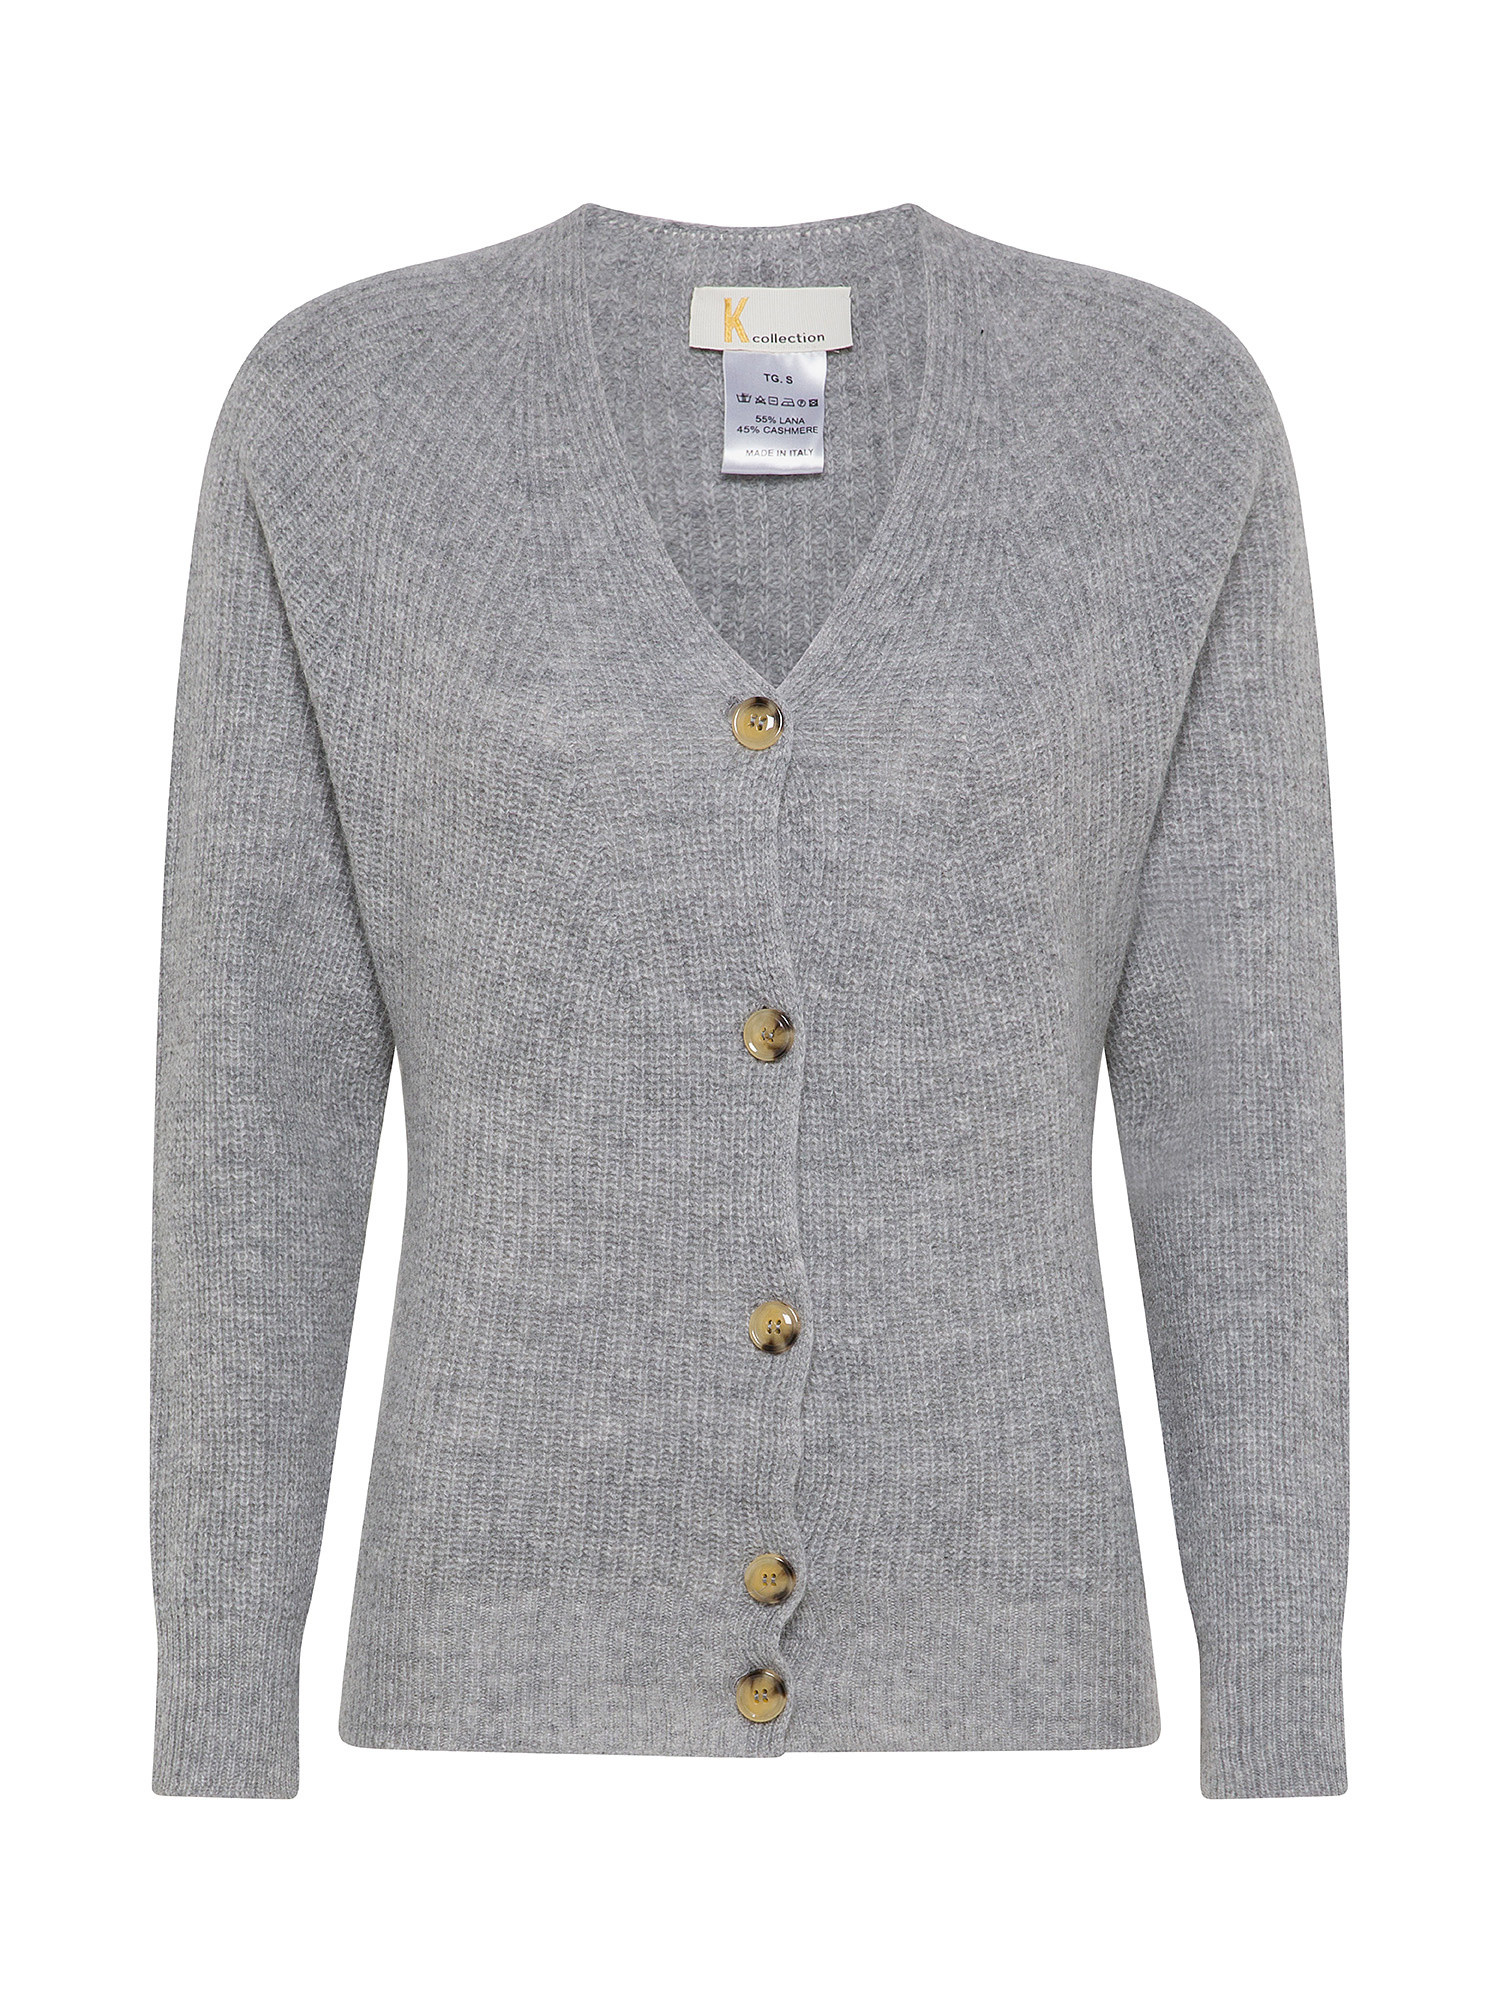 K Collection - Cardigan, Grigio, large image number 0